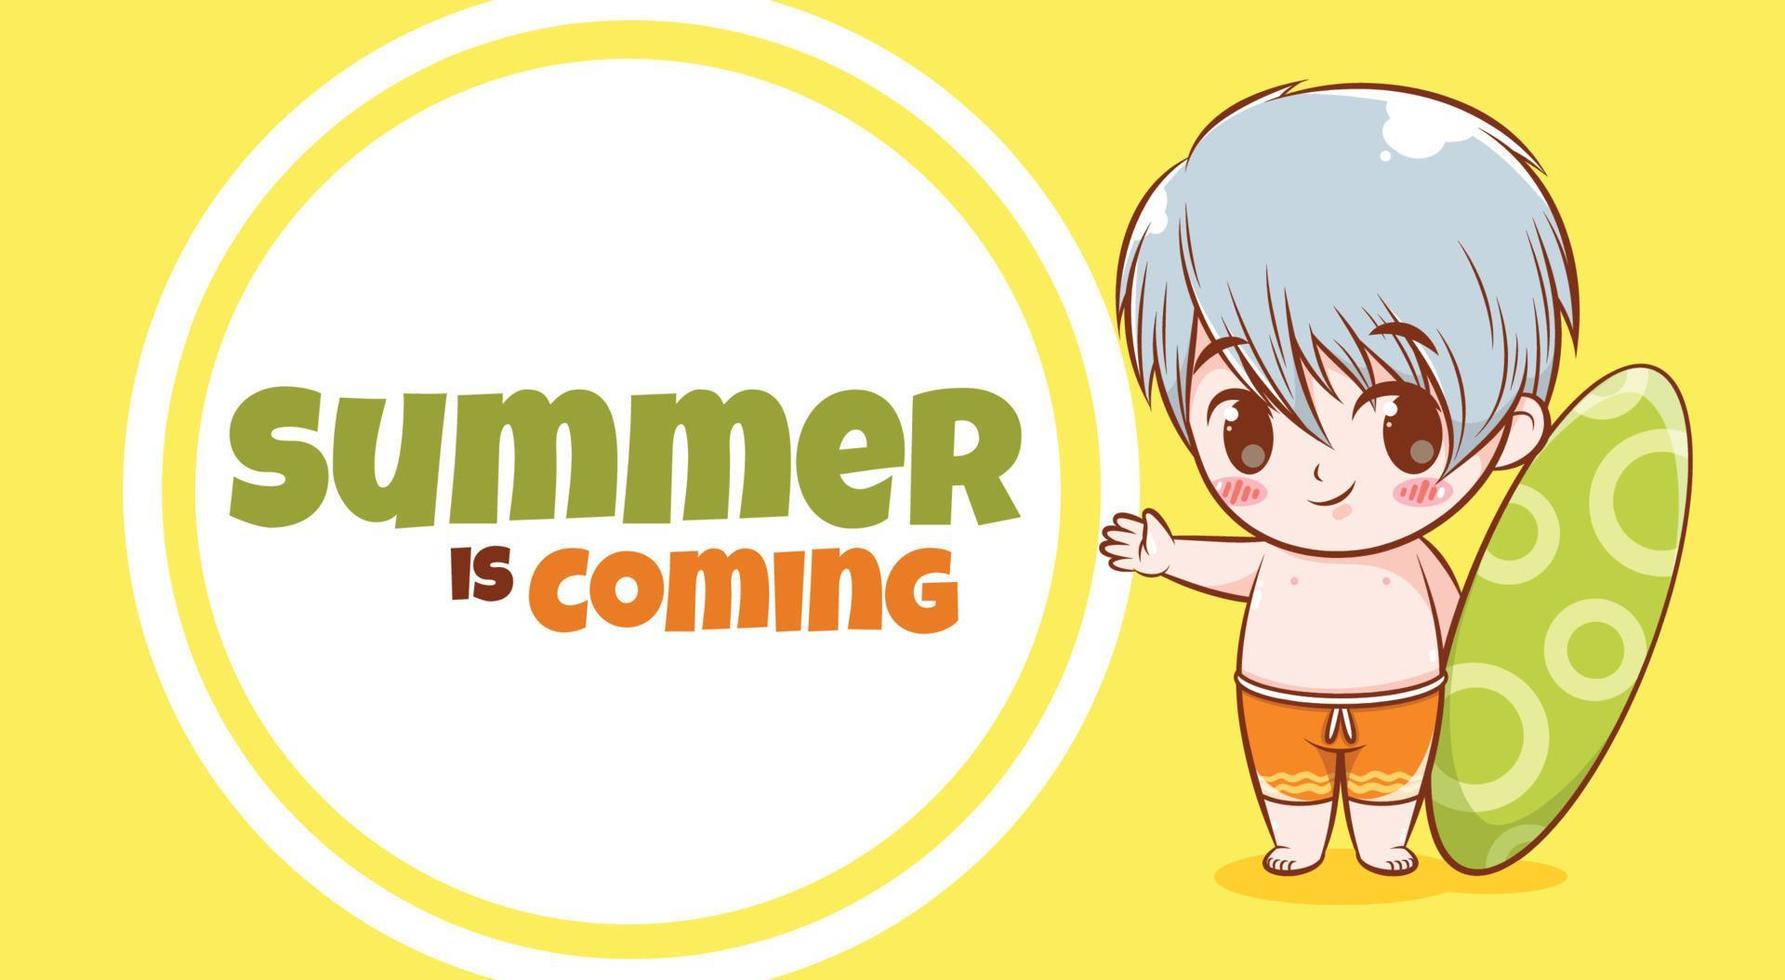 cute boy with a summer greeting banner. vector